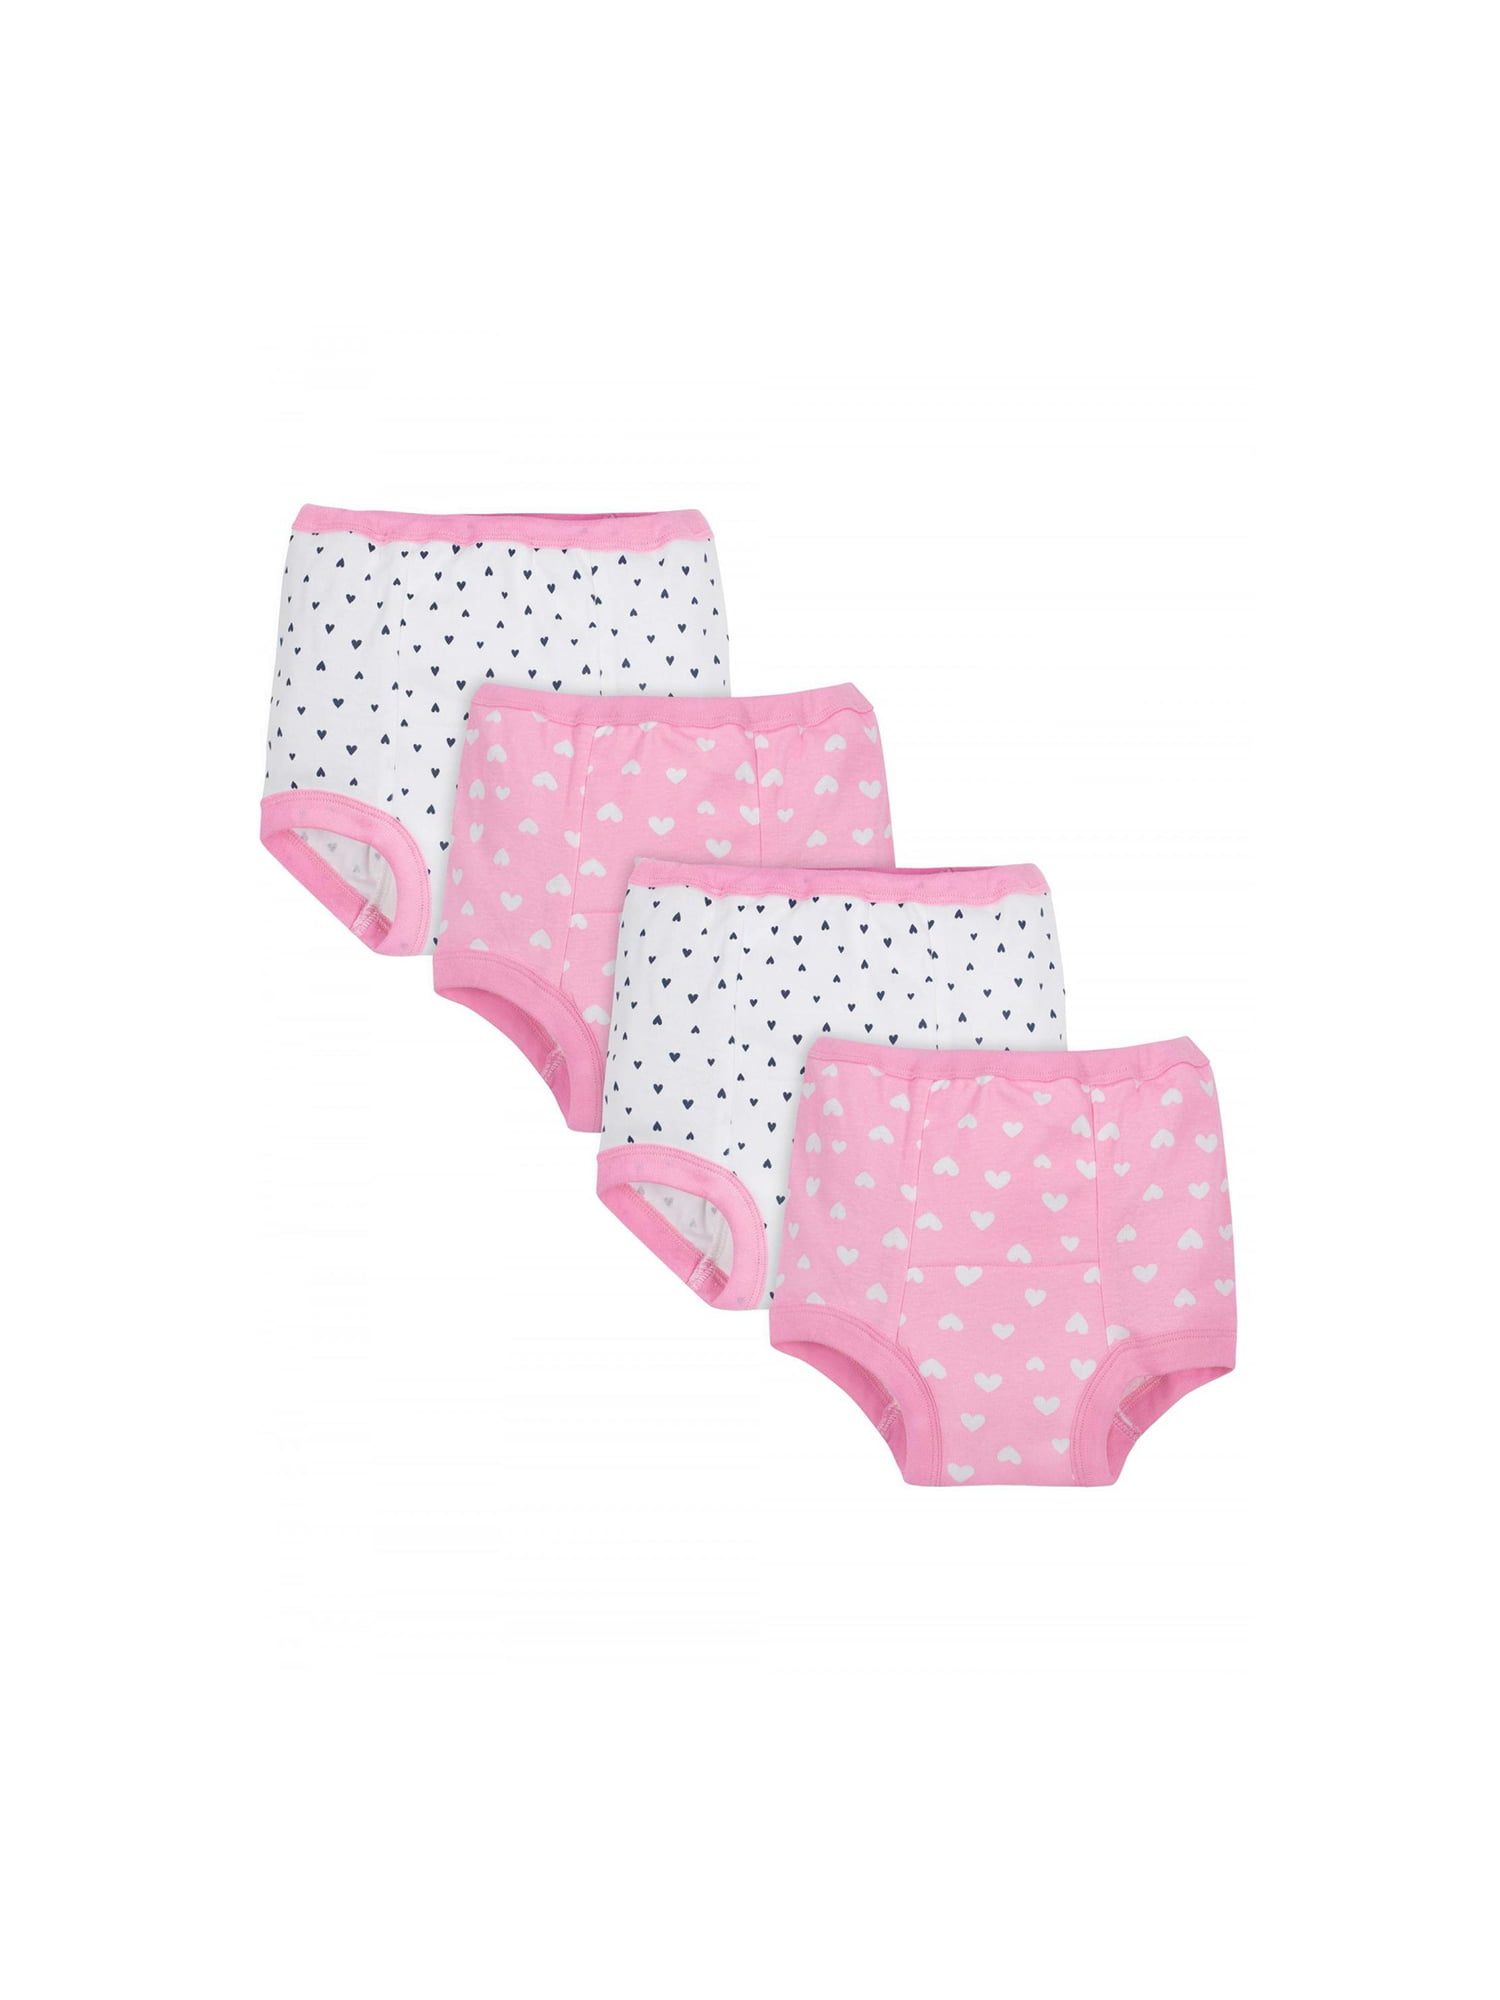 Gerber Baby Toddler Girl 3-Pack Pink/Purple Training Pants Size 2T 28/32lbs 